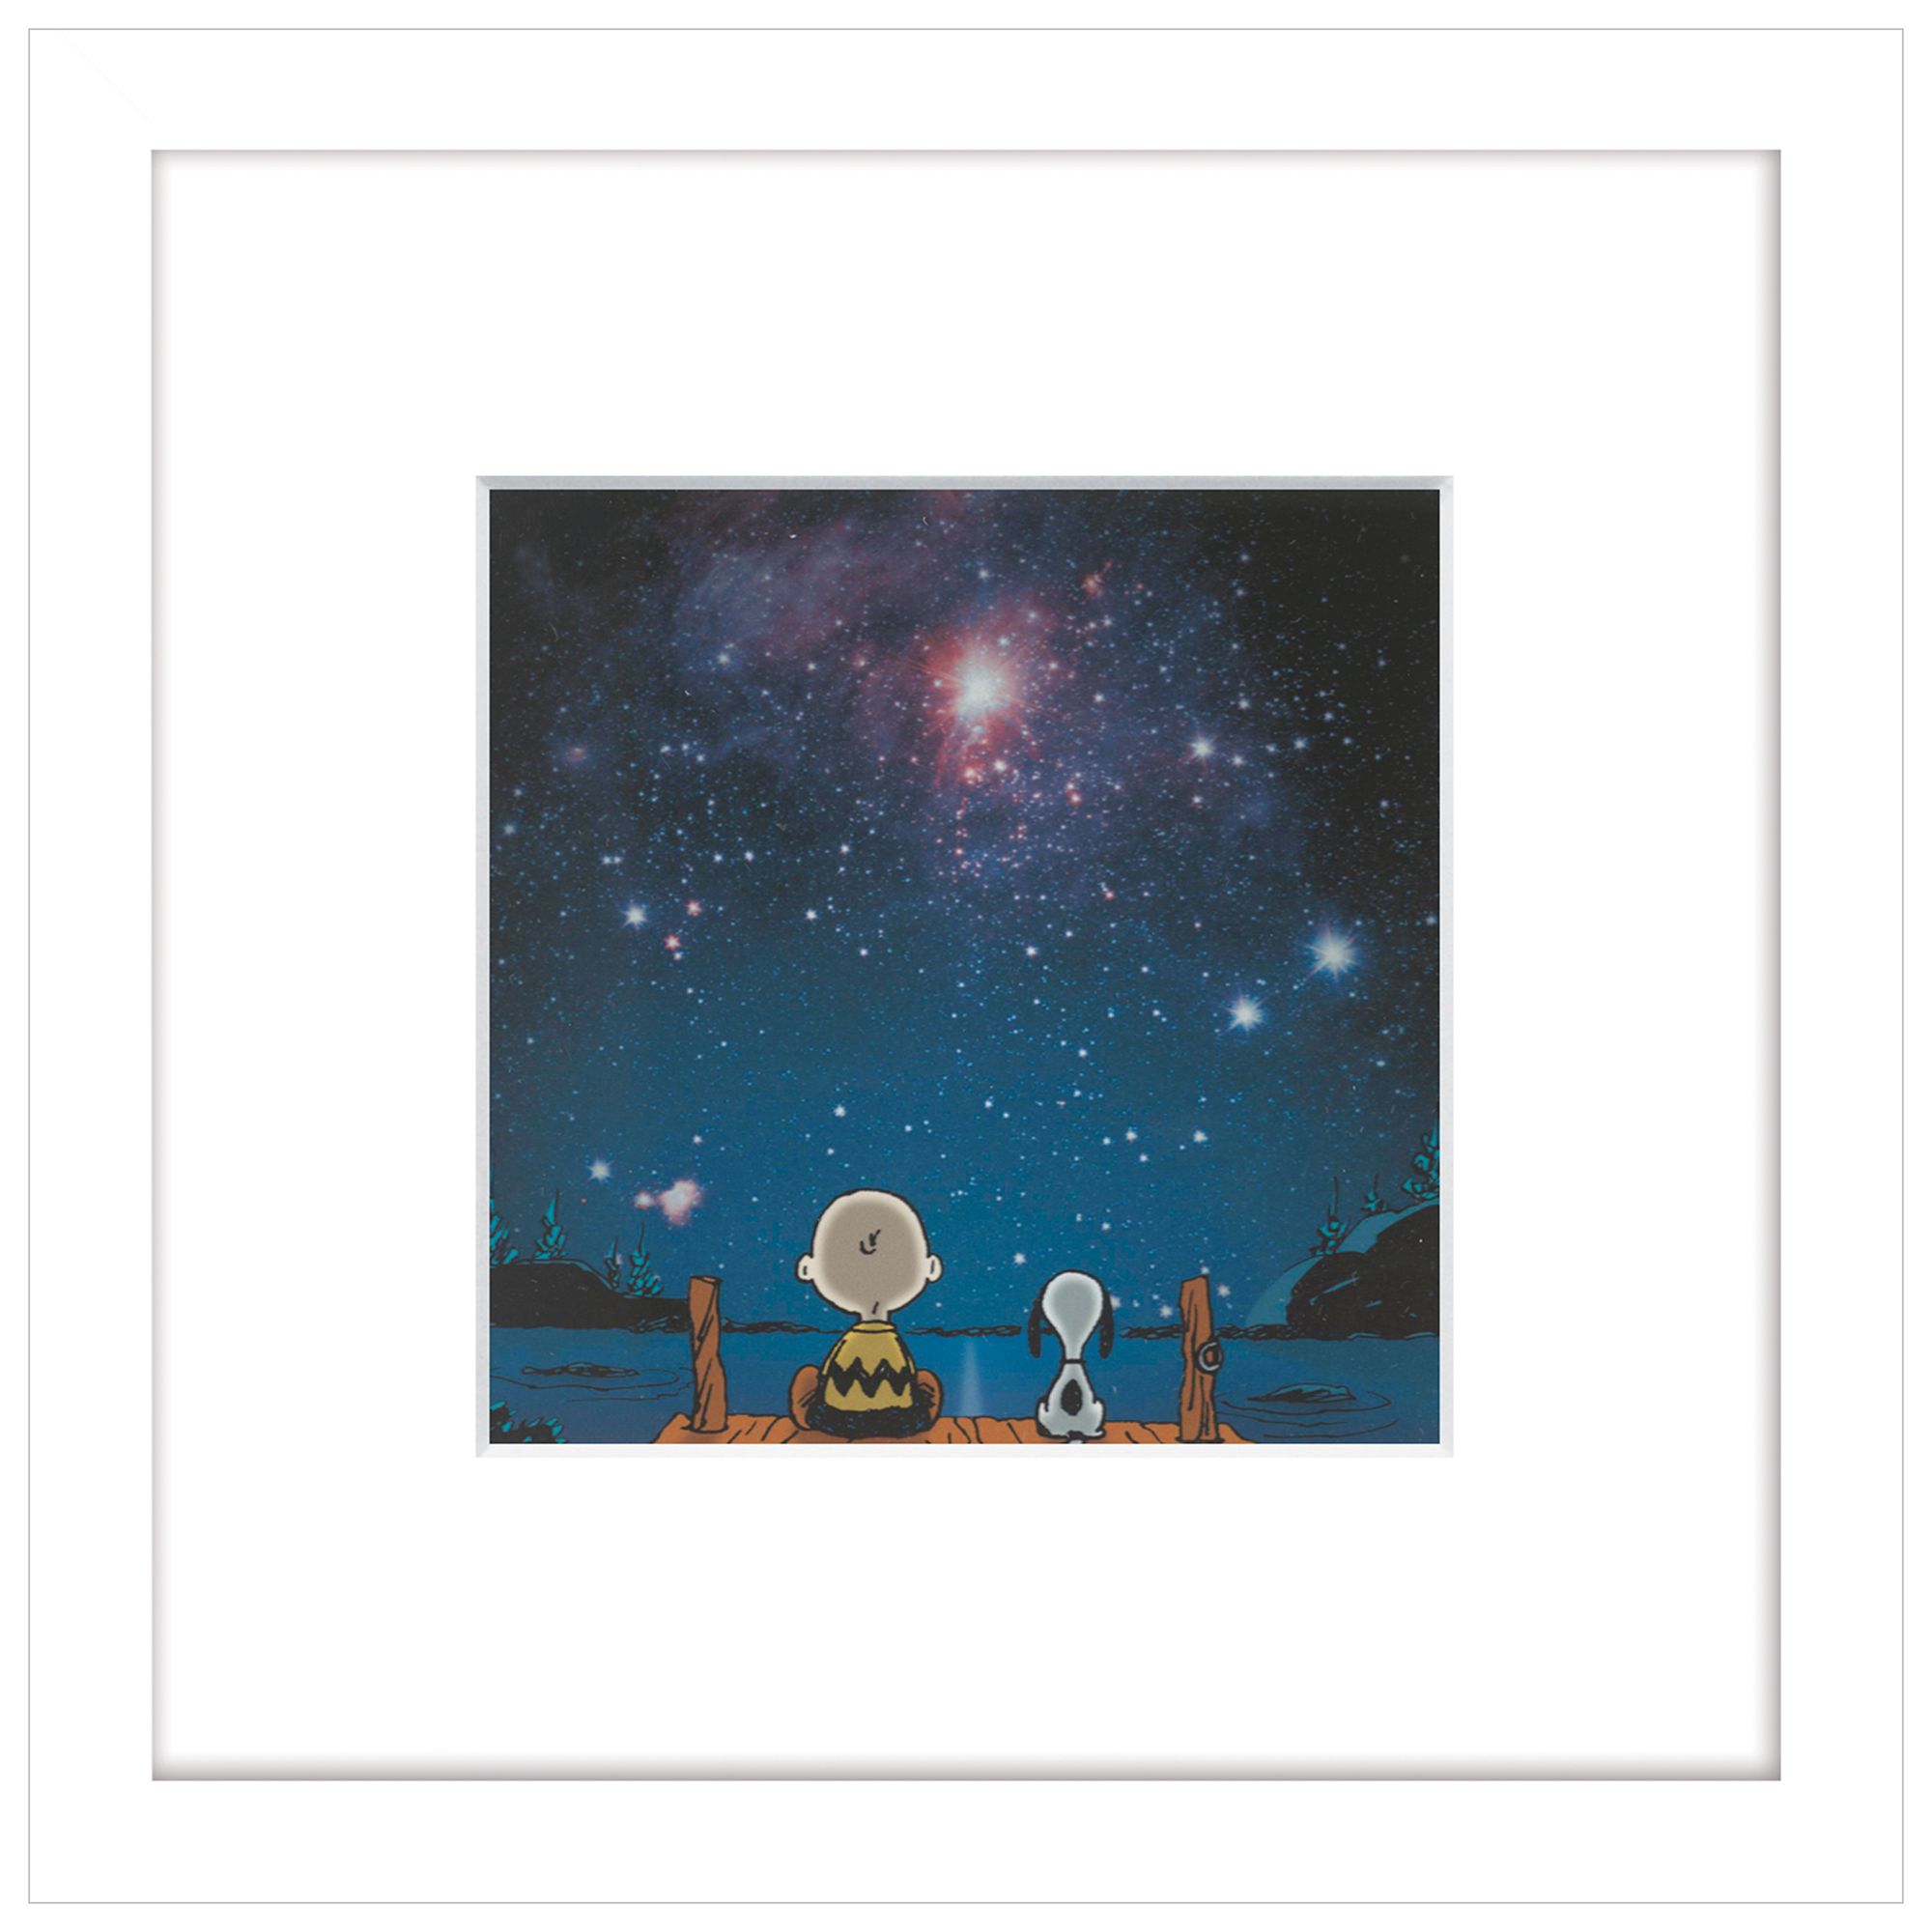 Peanuts - Snoopy and Charlie Stargazing, Framed Print, 23 x 23cm